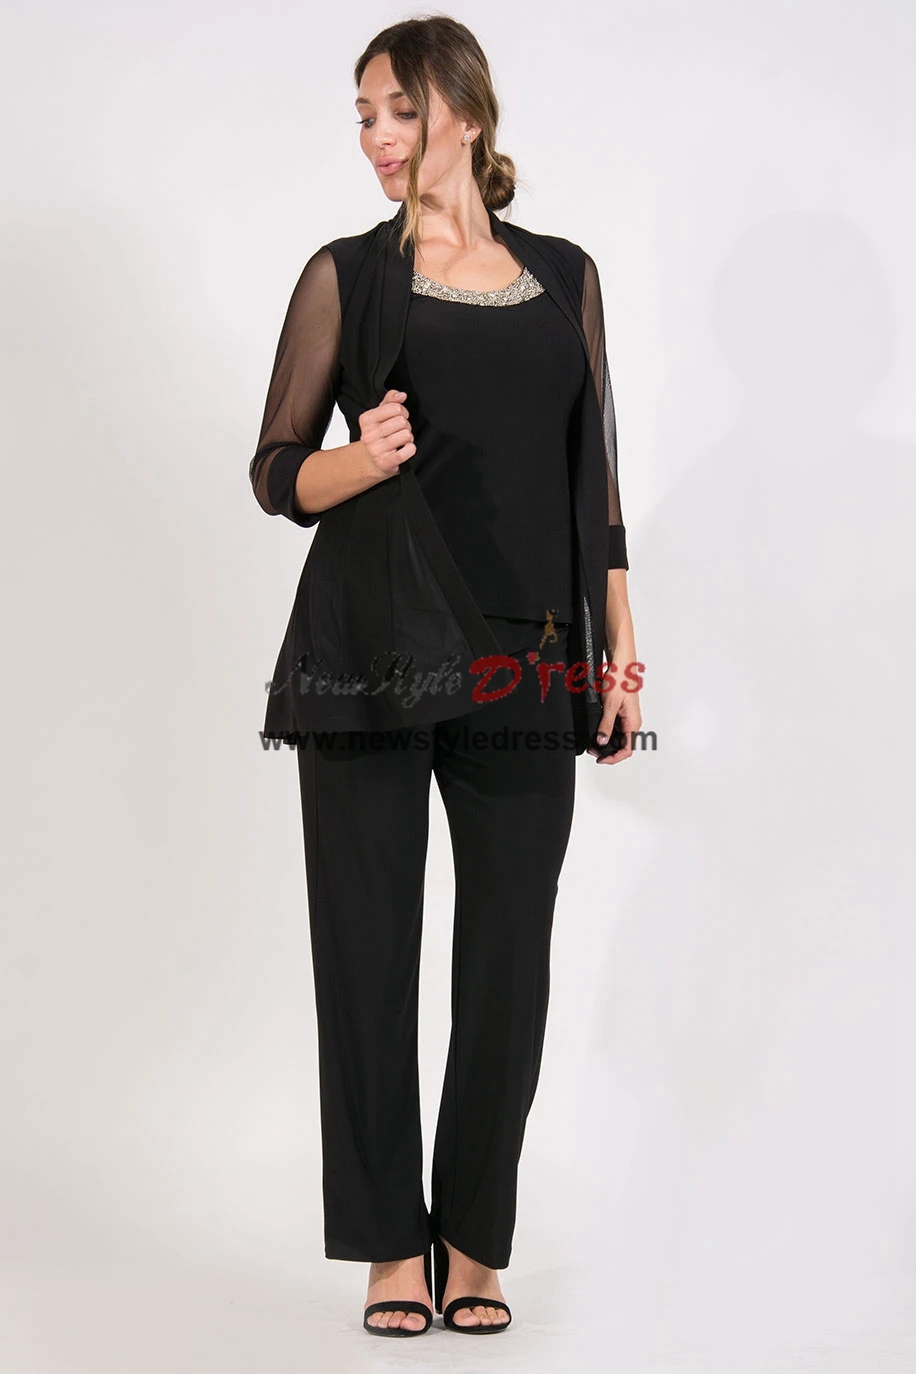 3PC Black Fashion Mother Of the Bride Outfits,Wedding Guest Pant Suits ...